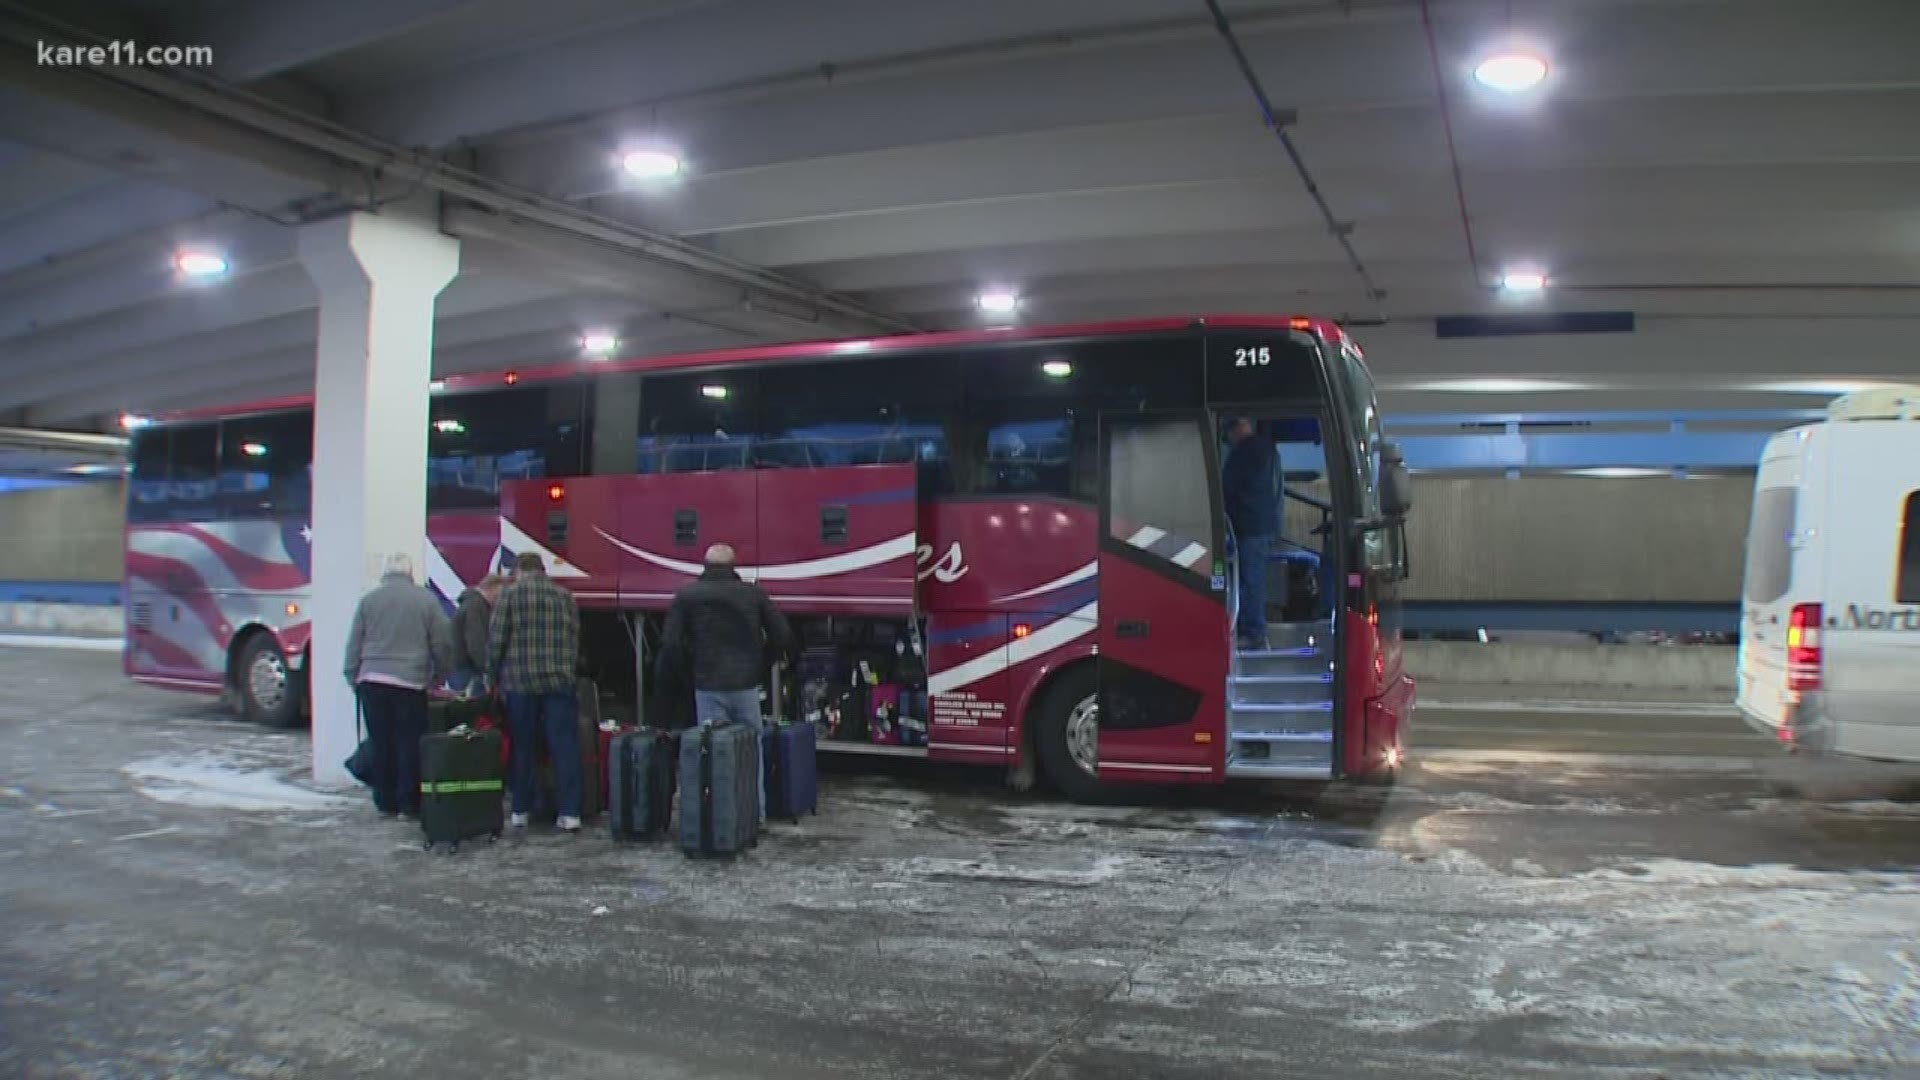 Imagine landing in the Twin Cities in sub-zero temperatures after a 10-day tropical cruise. That's what a group of Minnesota natives had to endure at the airport.